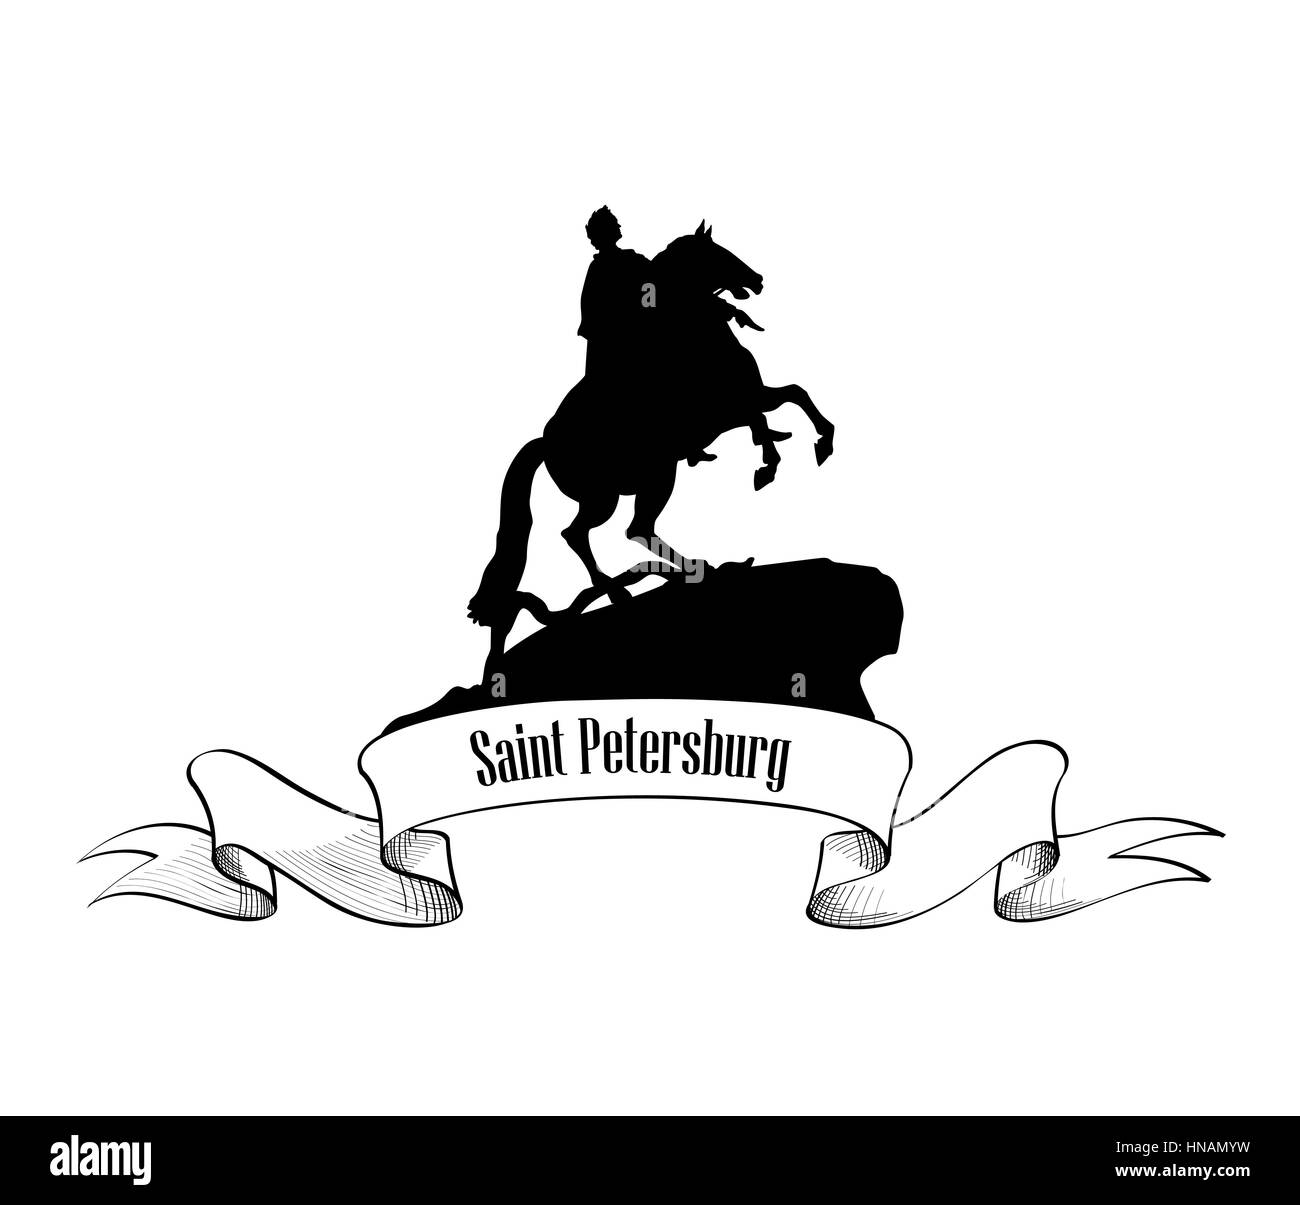 St. Petersburg label. Travel Russia symbol. Hand drawn icon isolated. Peter the Great Monument, Saint Petersburg landmark, Russia. Stock Vector